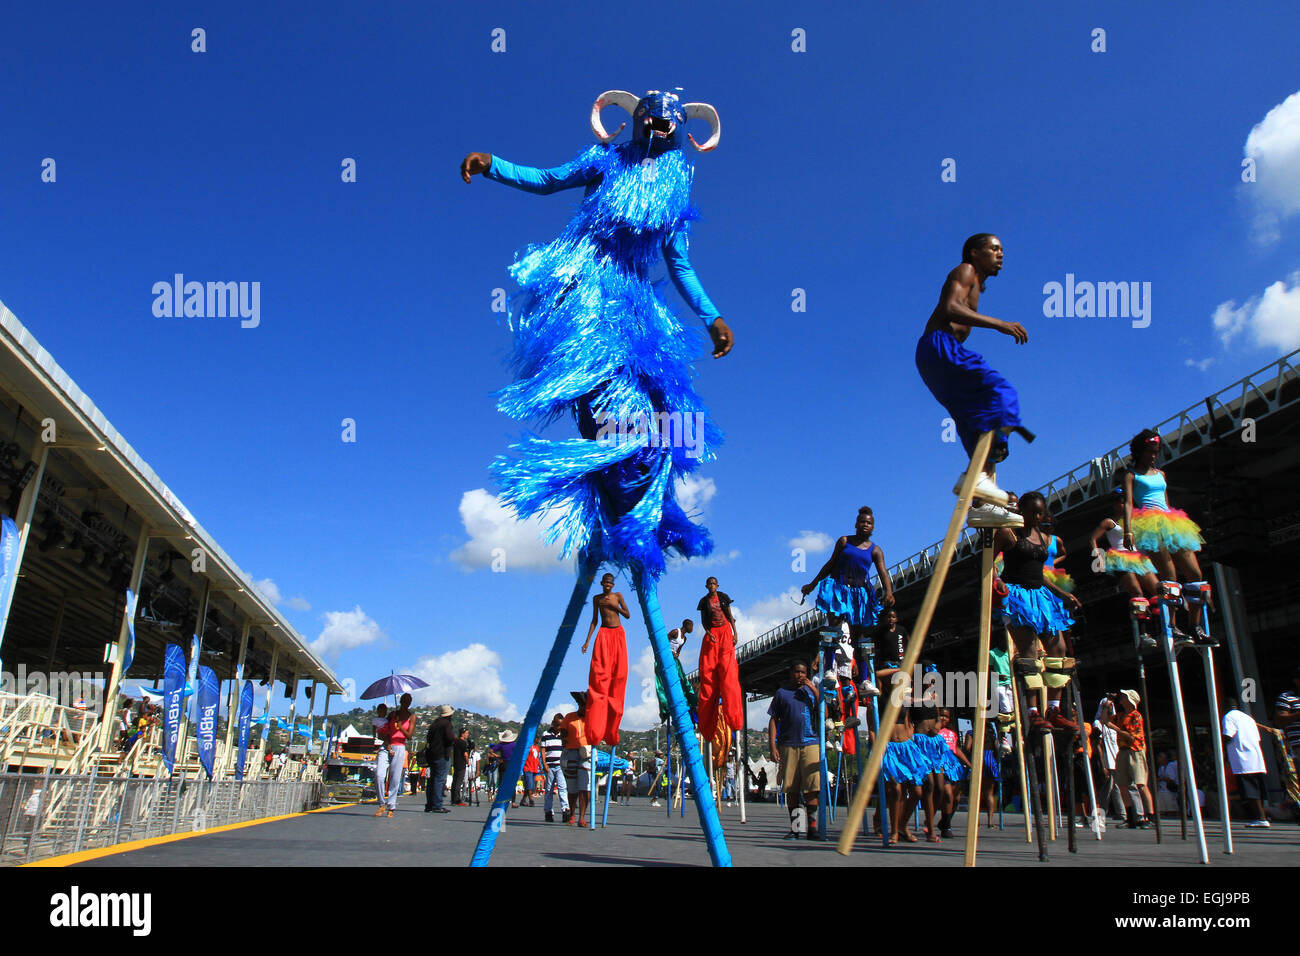 Moko Jumbies dance on the Queen's Park Savannah Stage during the Republic Bank Children's Carnival in Port of Spain, Trinidad. Stock Photo